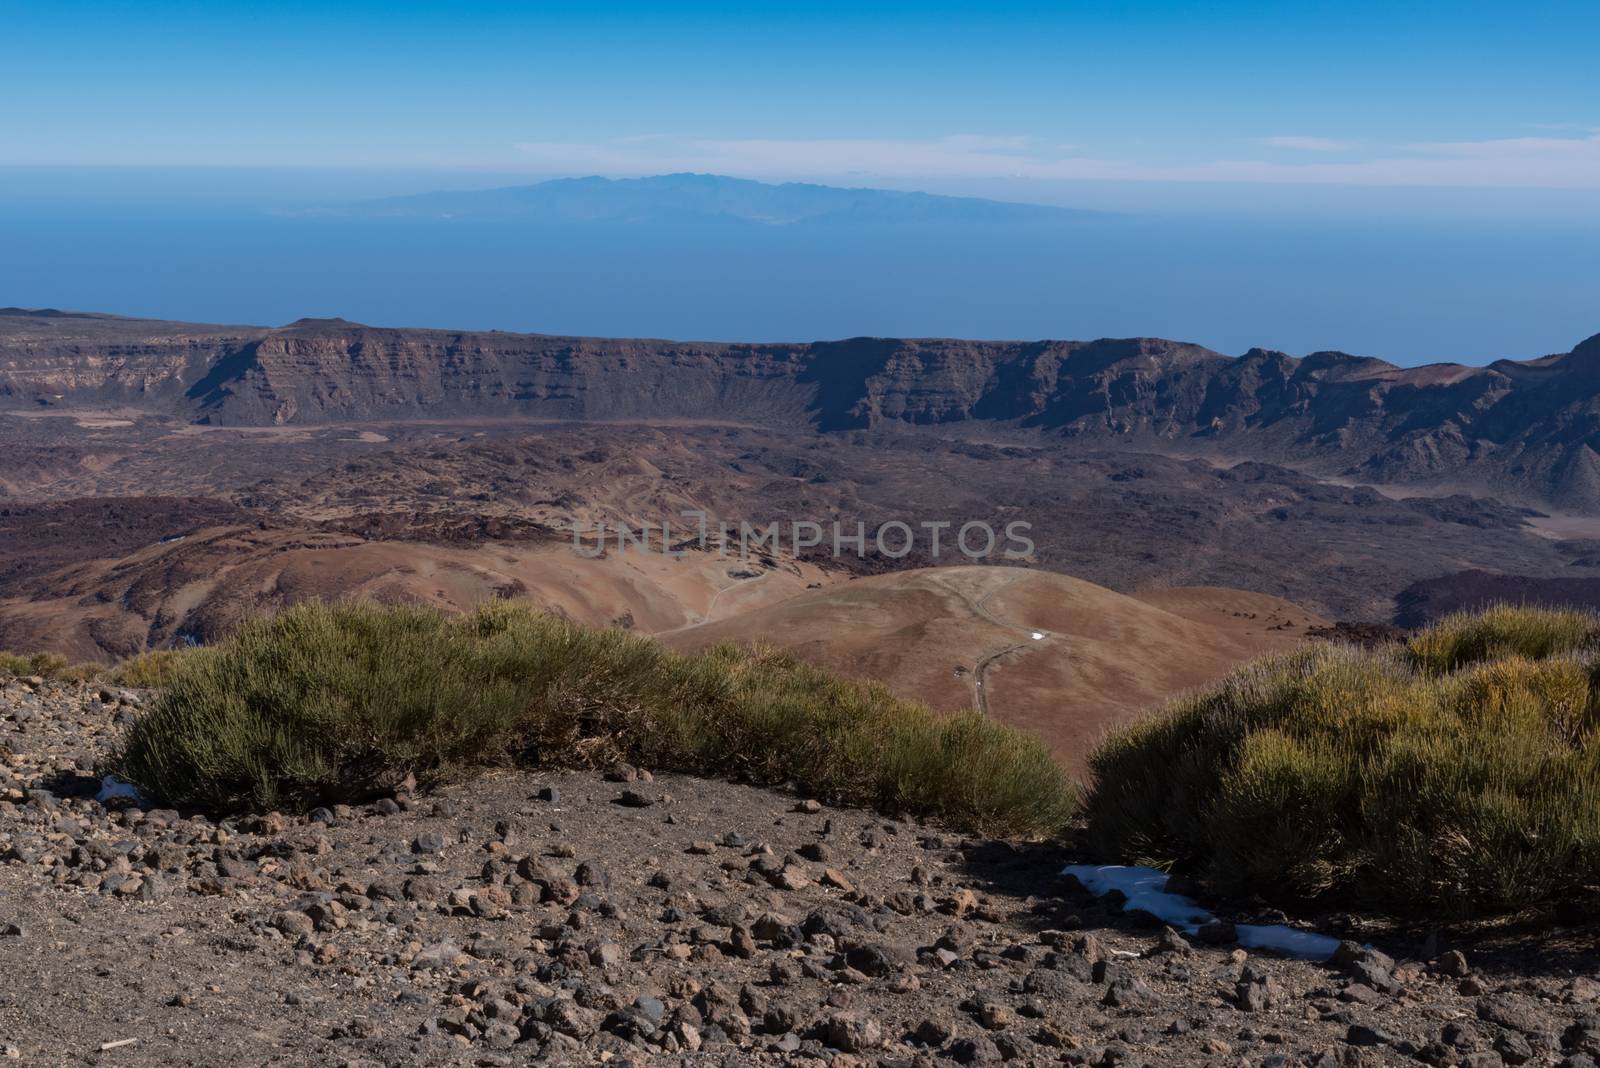 View from Teide то Las Canadas Caldera volcano with solidified lava and Montana Blanca mount. Teide national Park, Tenerife, Canary Islands, Spain. Panorama